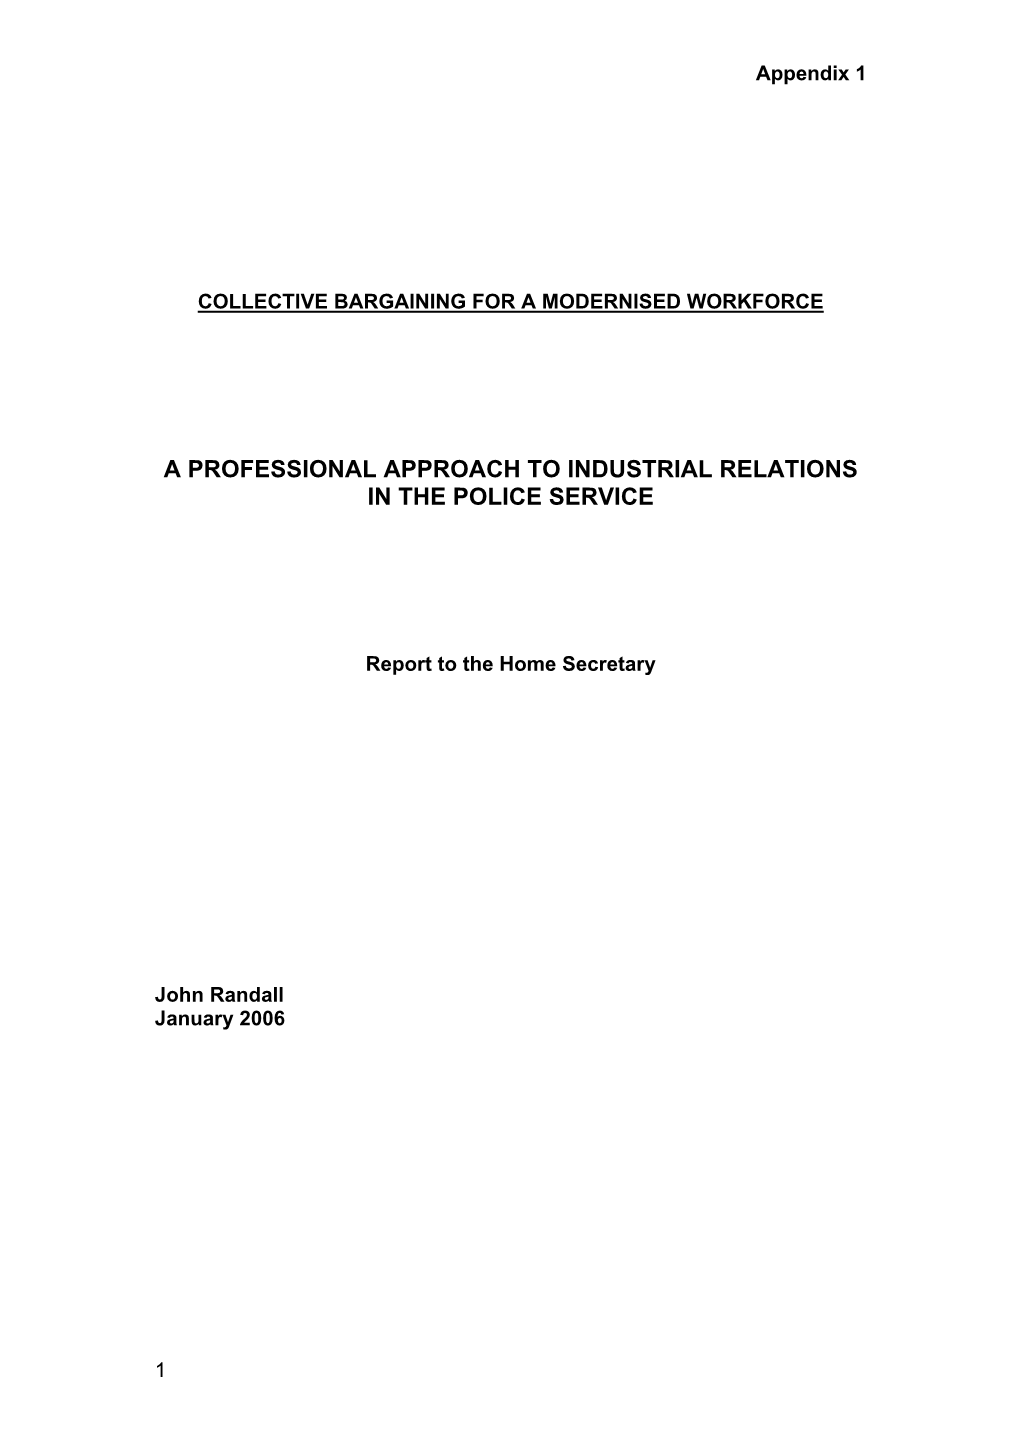 Review of Bargaining Procedures in the Police Service